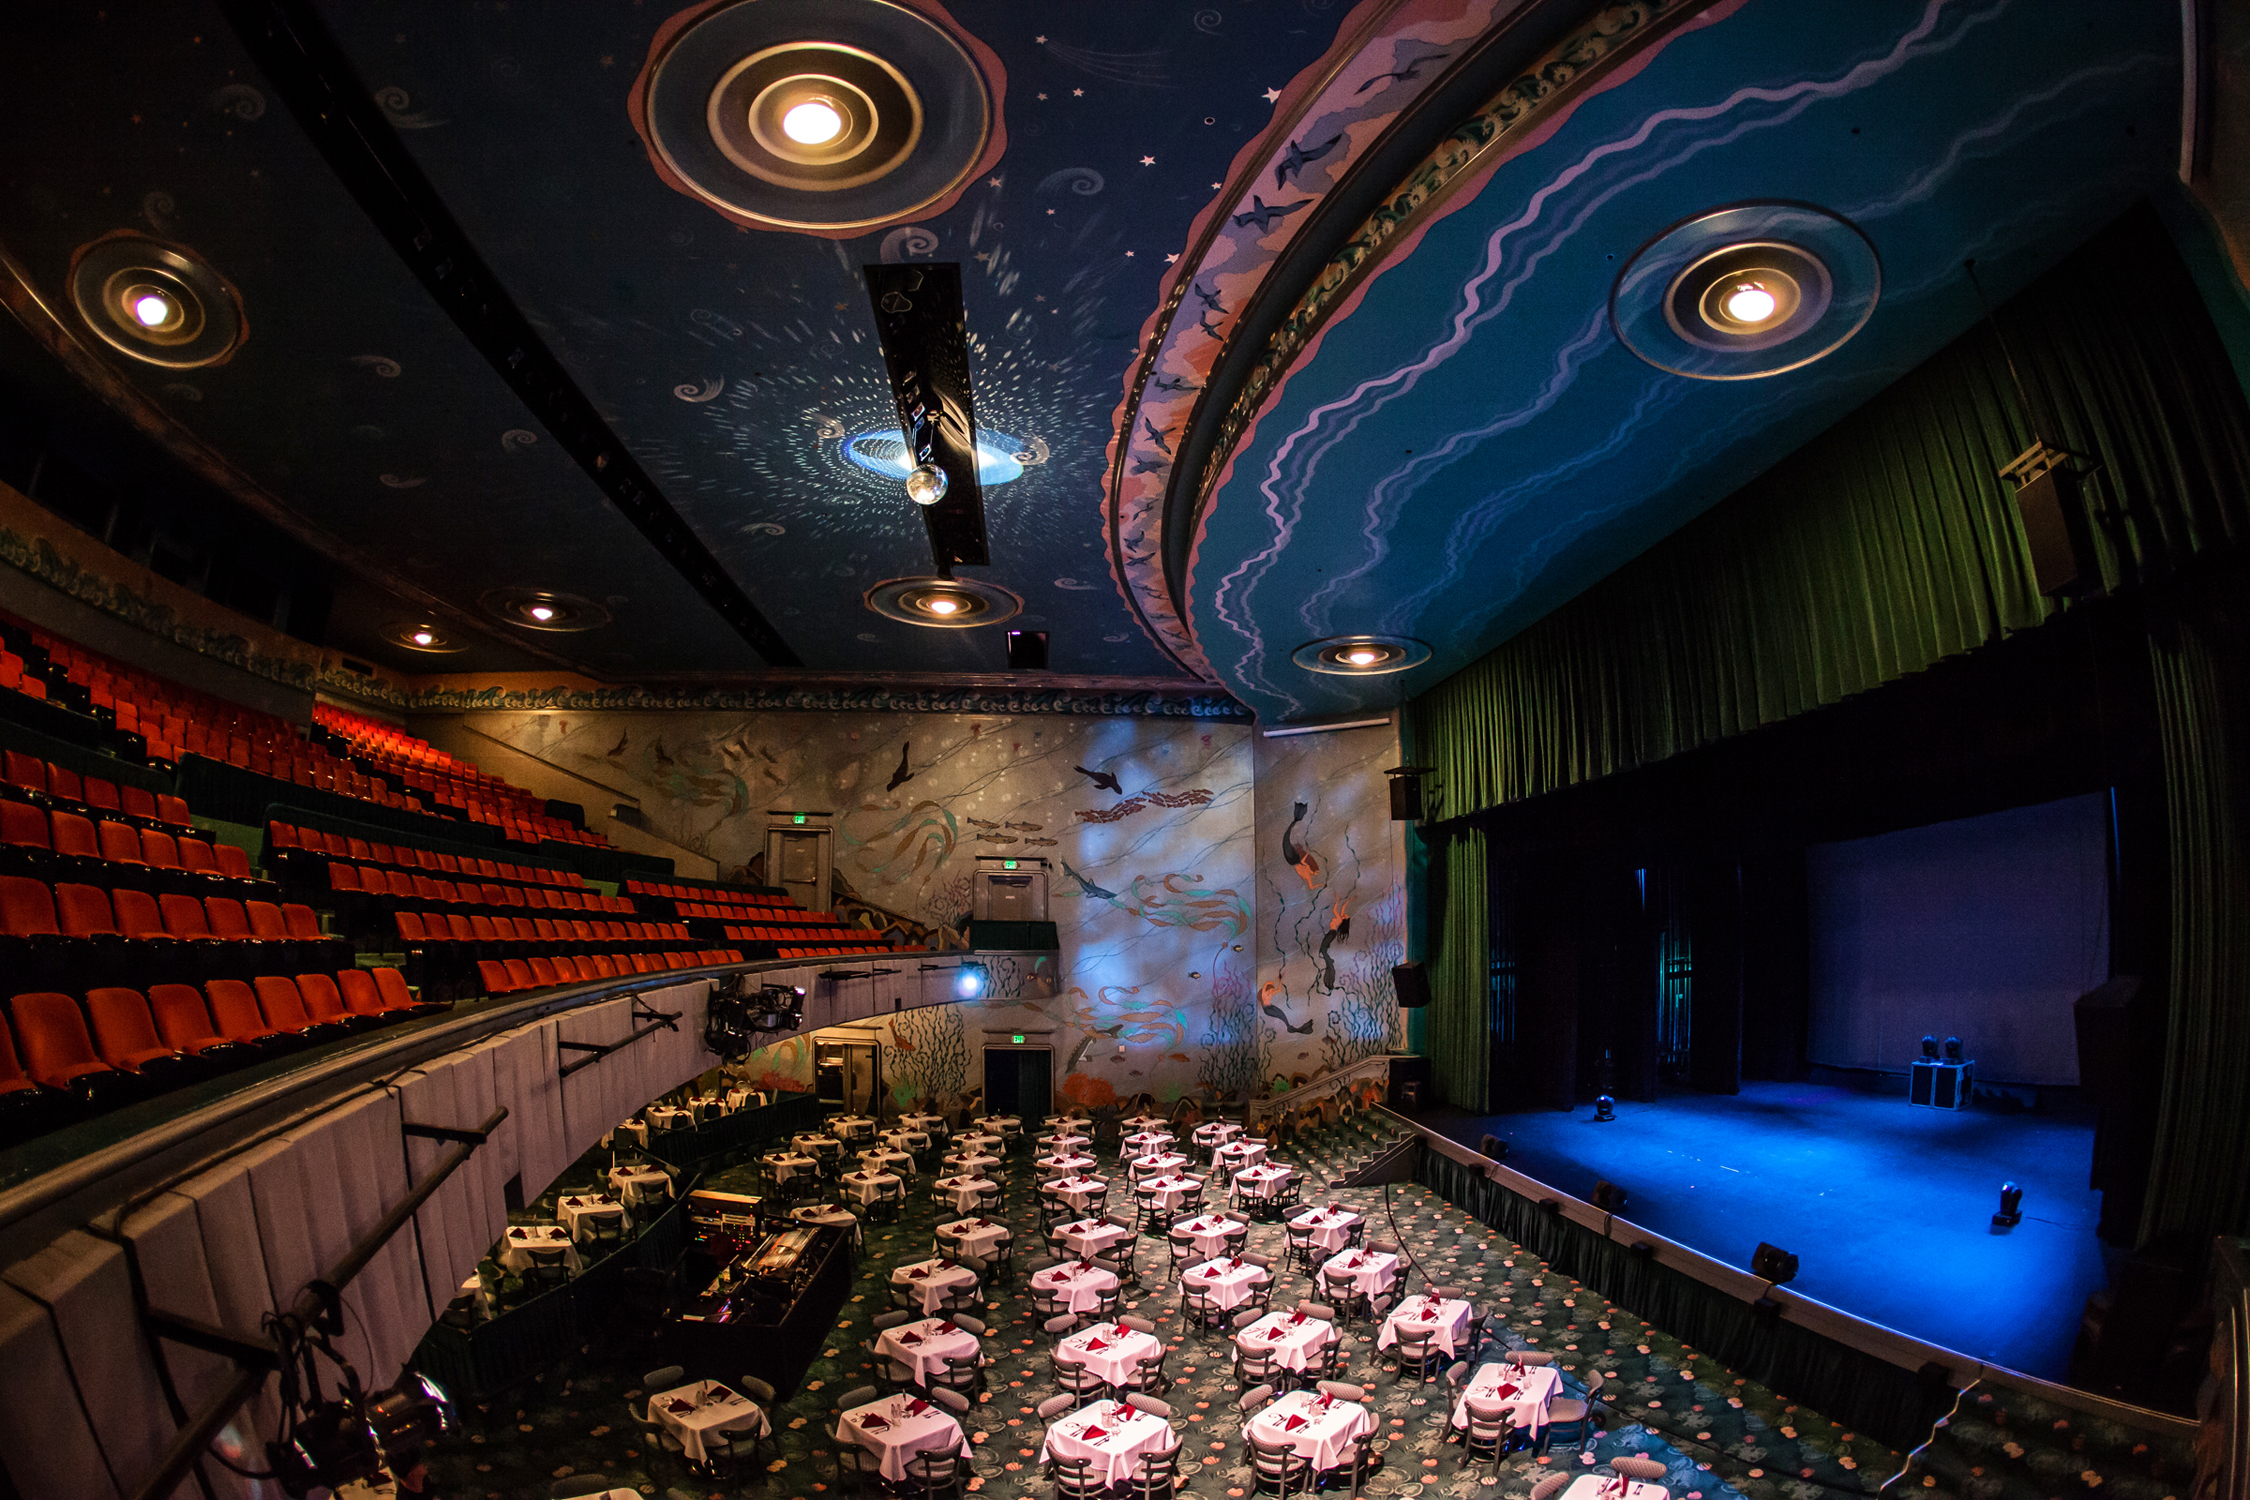 The Admiral Theatre is a 1942 movie house, renovated in 1997, into Kitsap County's premier live entertainment and events venue.